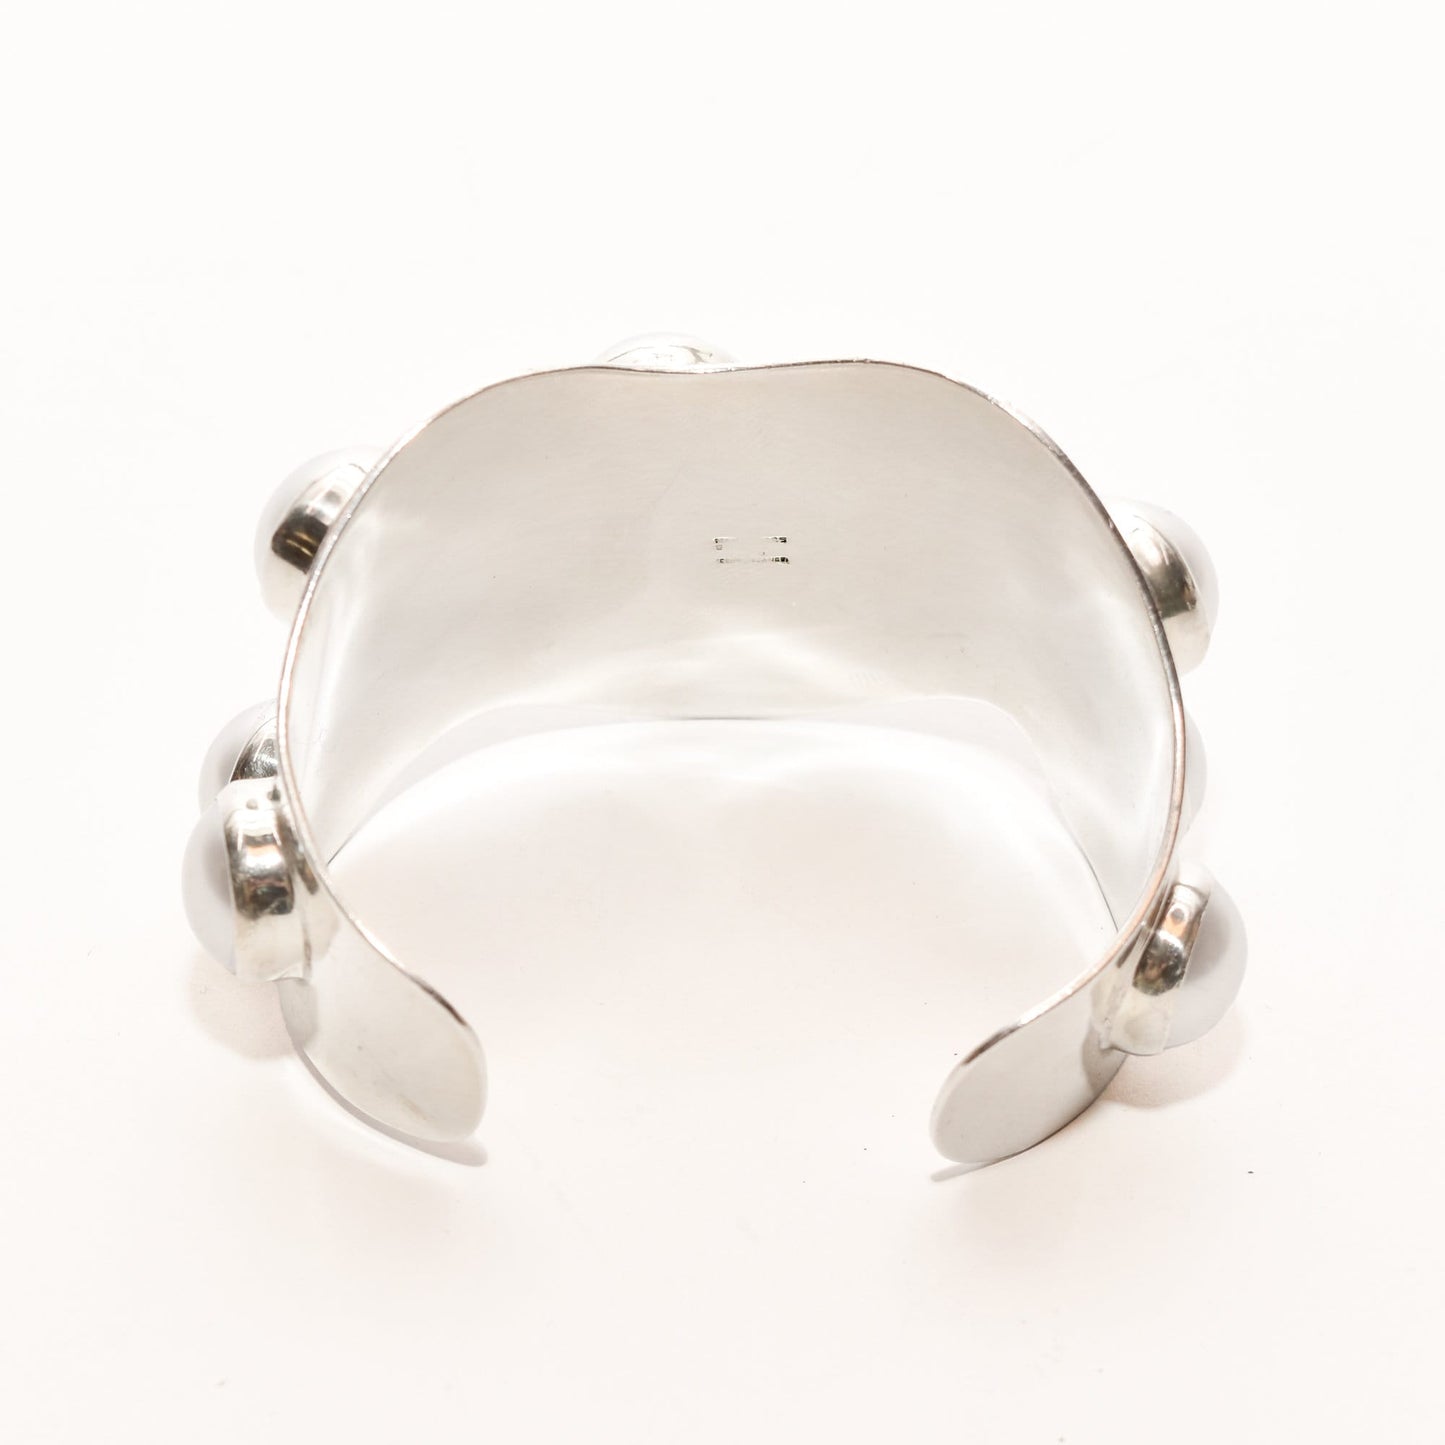 TAXCO Modernist sterling silver cuff bracelet with Mabe pearl, featuring a wide wavy design and sized at 5.75 inches, displayed against a white background.